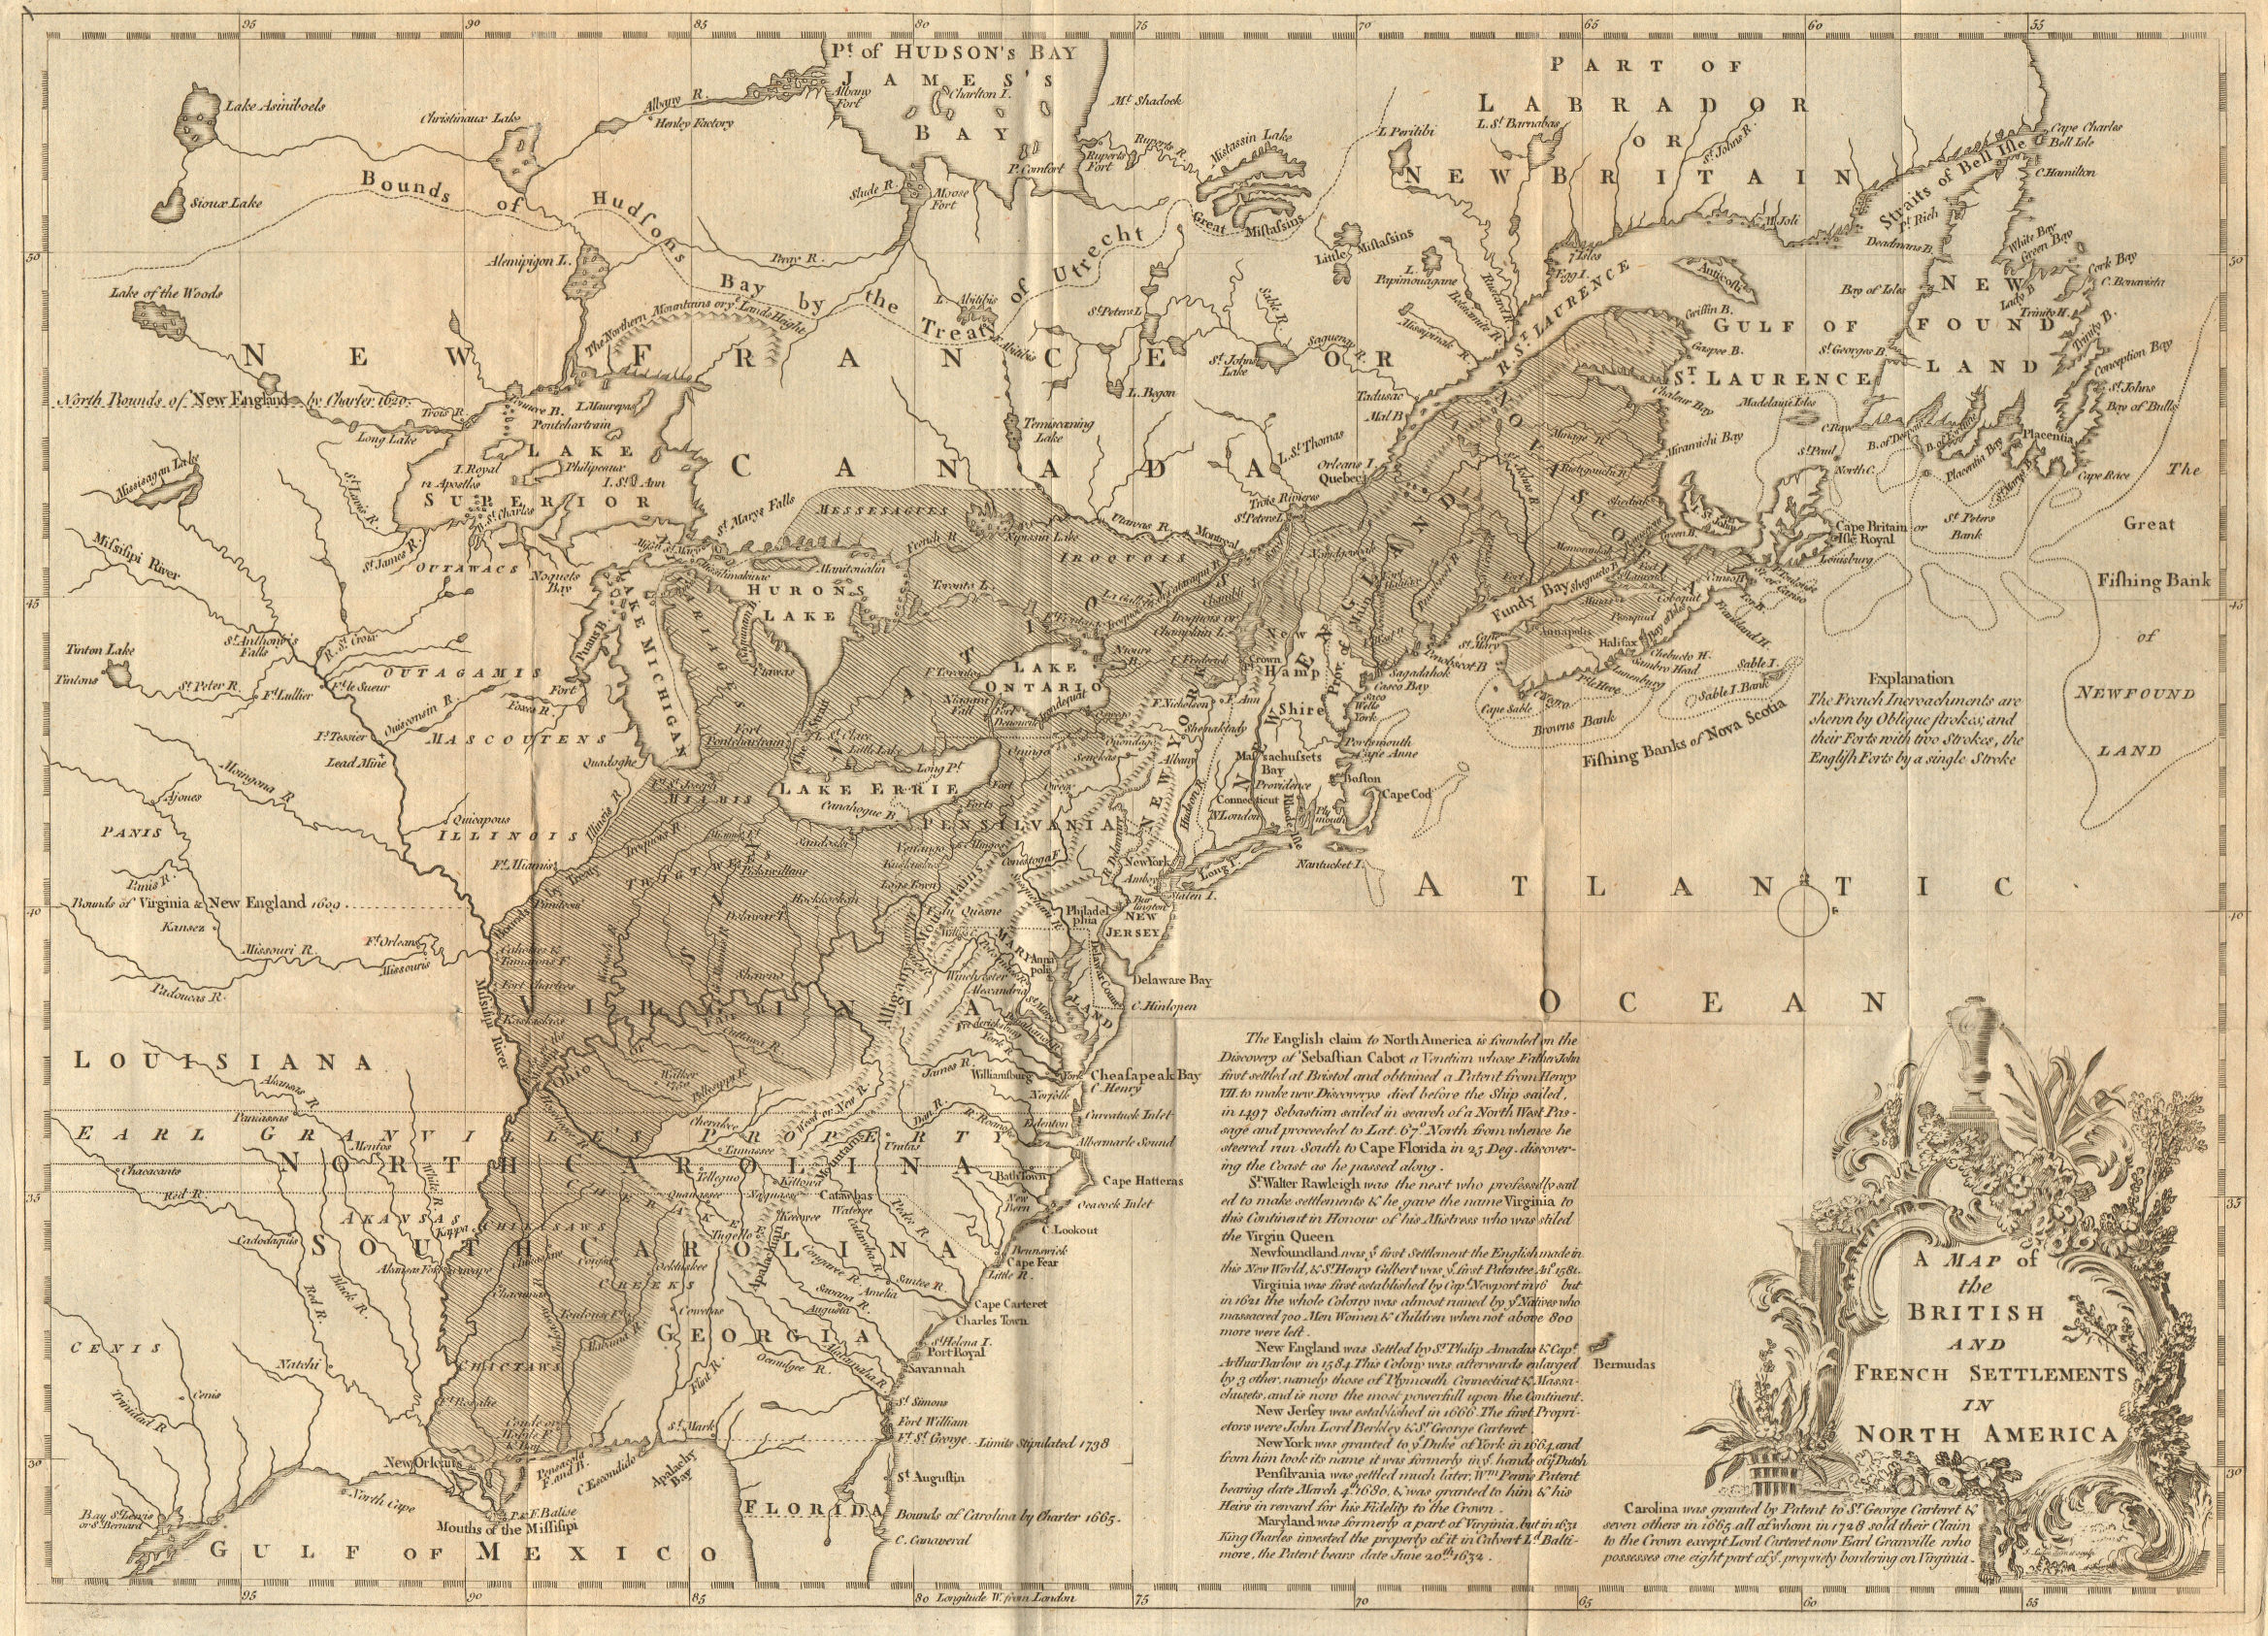 A map of the British and French Settlements in North America. LODGE 1755